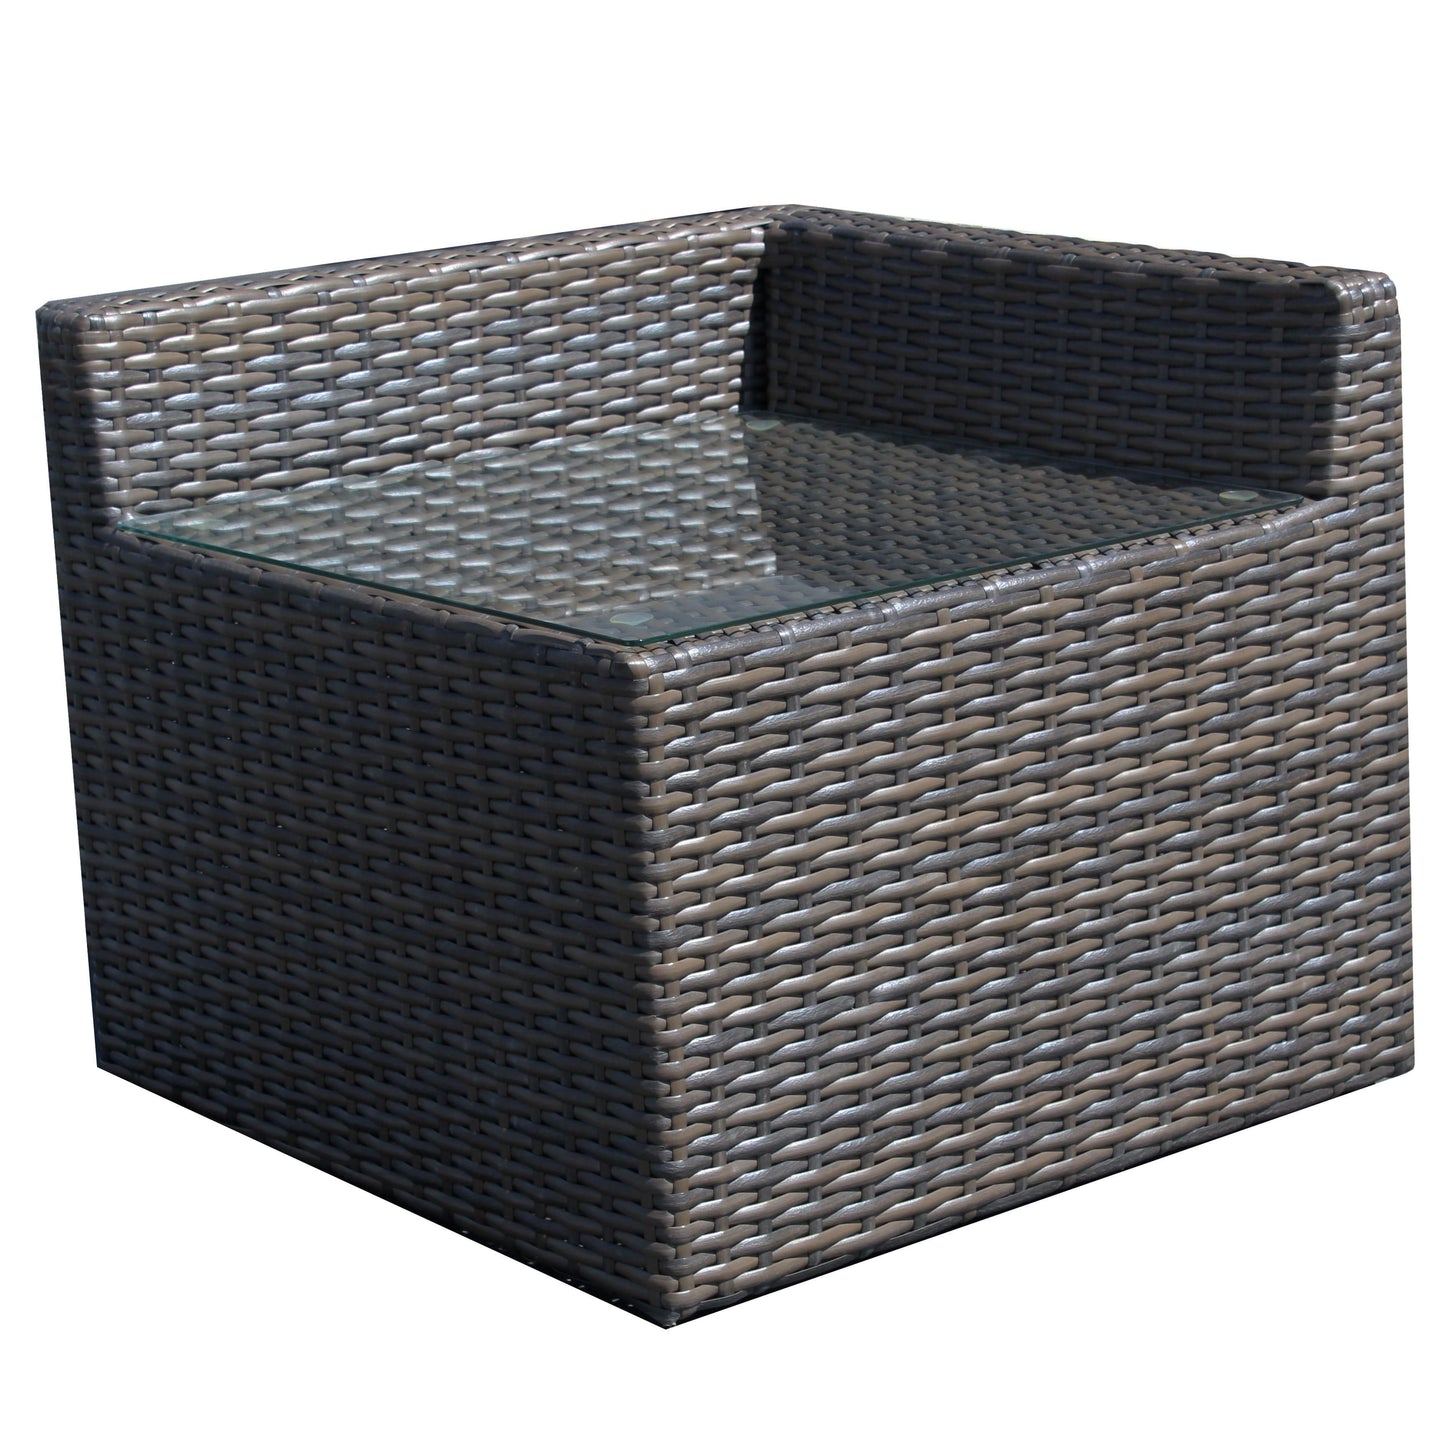 Forever Patio Horizon Wicker Corner End Table INCLUDES GLASS TOP FP-HOR-CET-BS Seating Forever Patio 